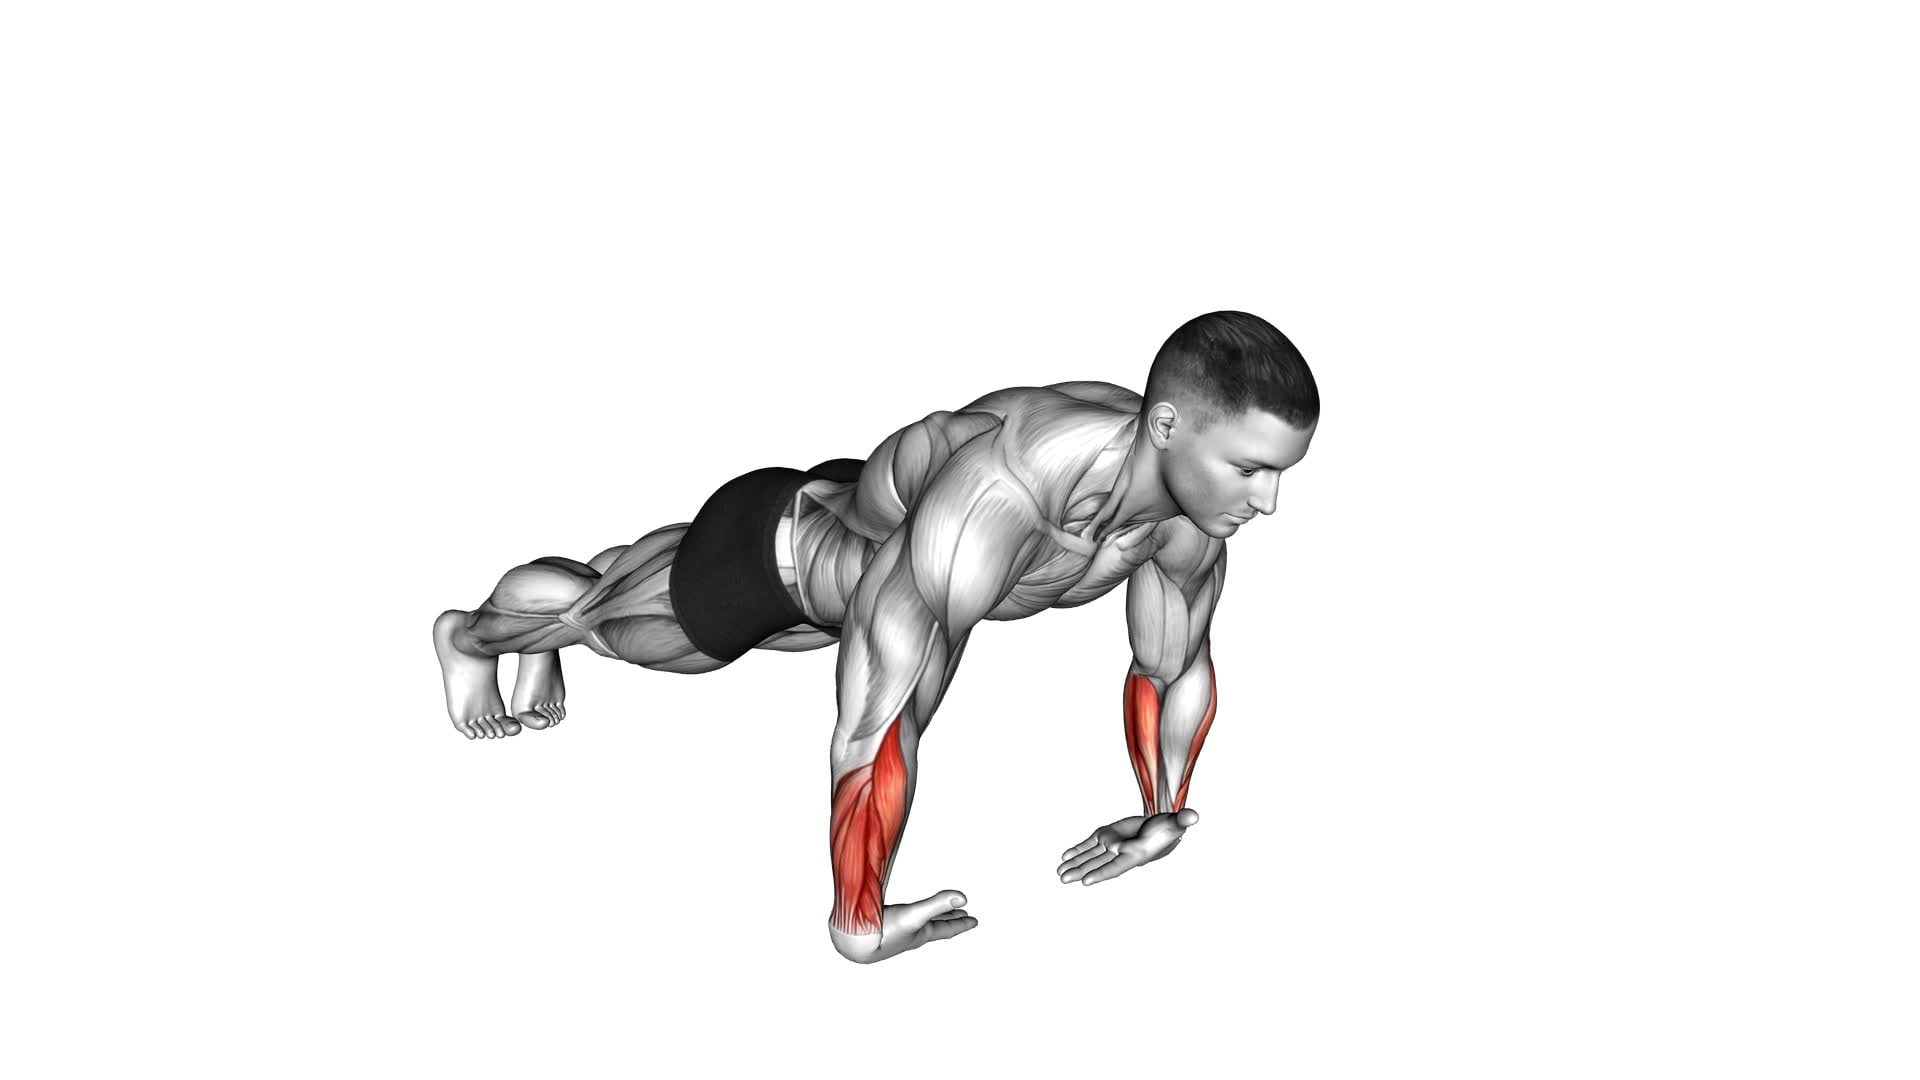 Wrist Push-up (male) - Video Exercise Guide & Tips